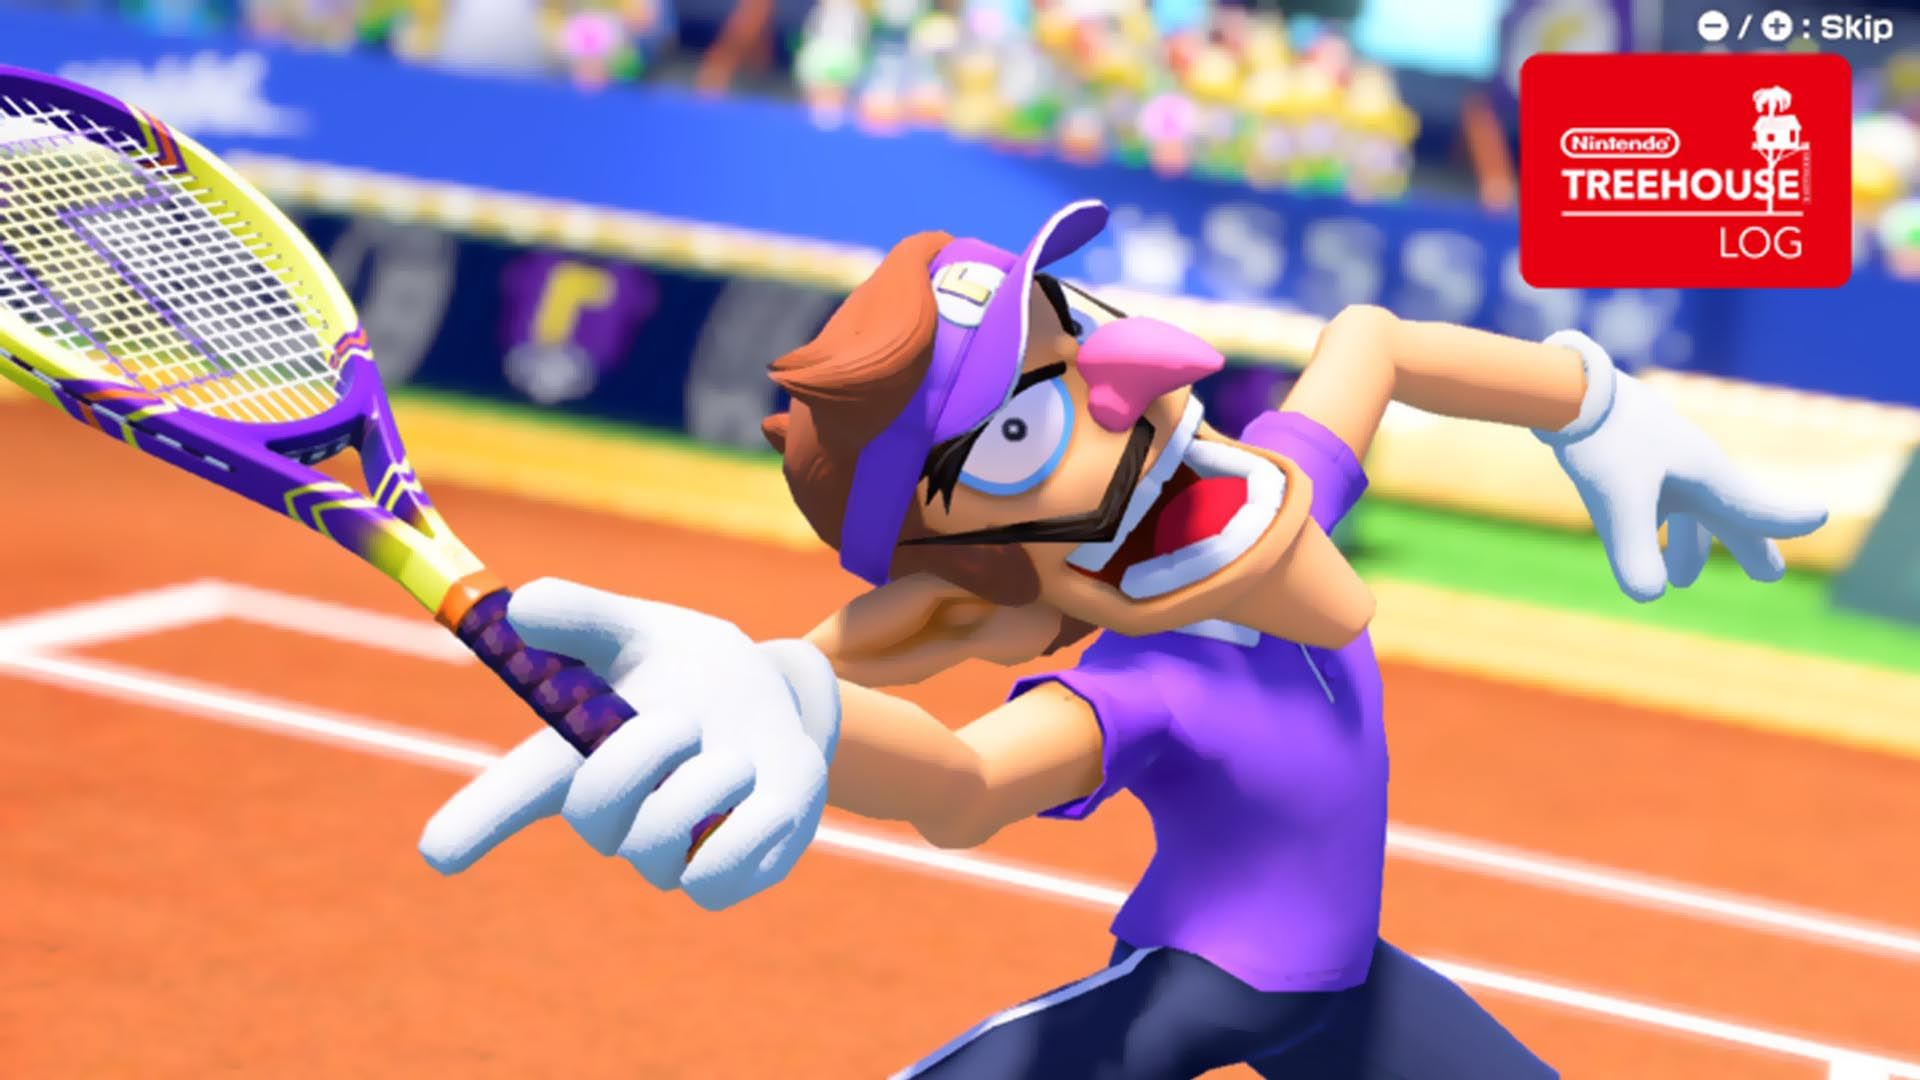 Newest Treehouse Log Introduces Mario Tennis Aces' Tennis